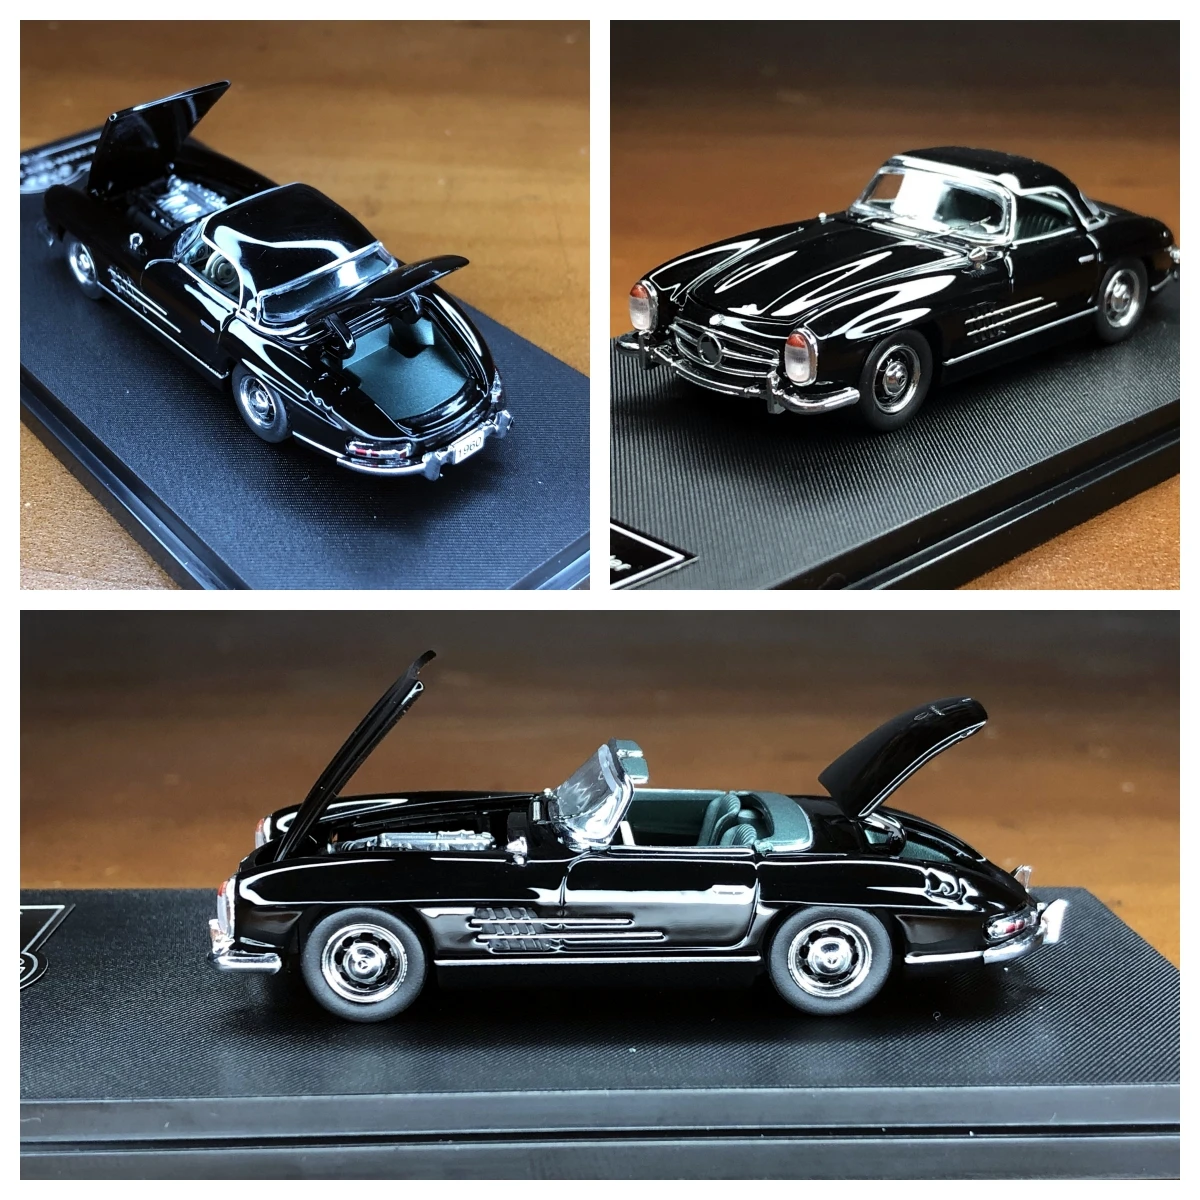 

GFCC 1:64 MB 300 SL Roadster Convertible Black Hardtop Diecast Model Car Collection Limited Edition Hobby Toys